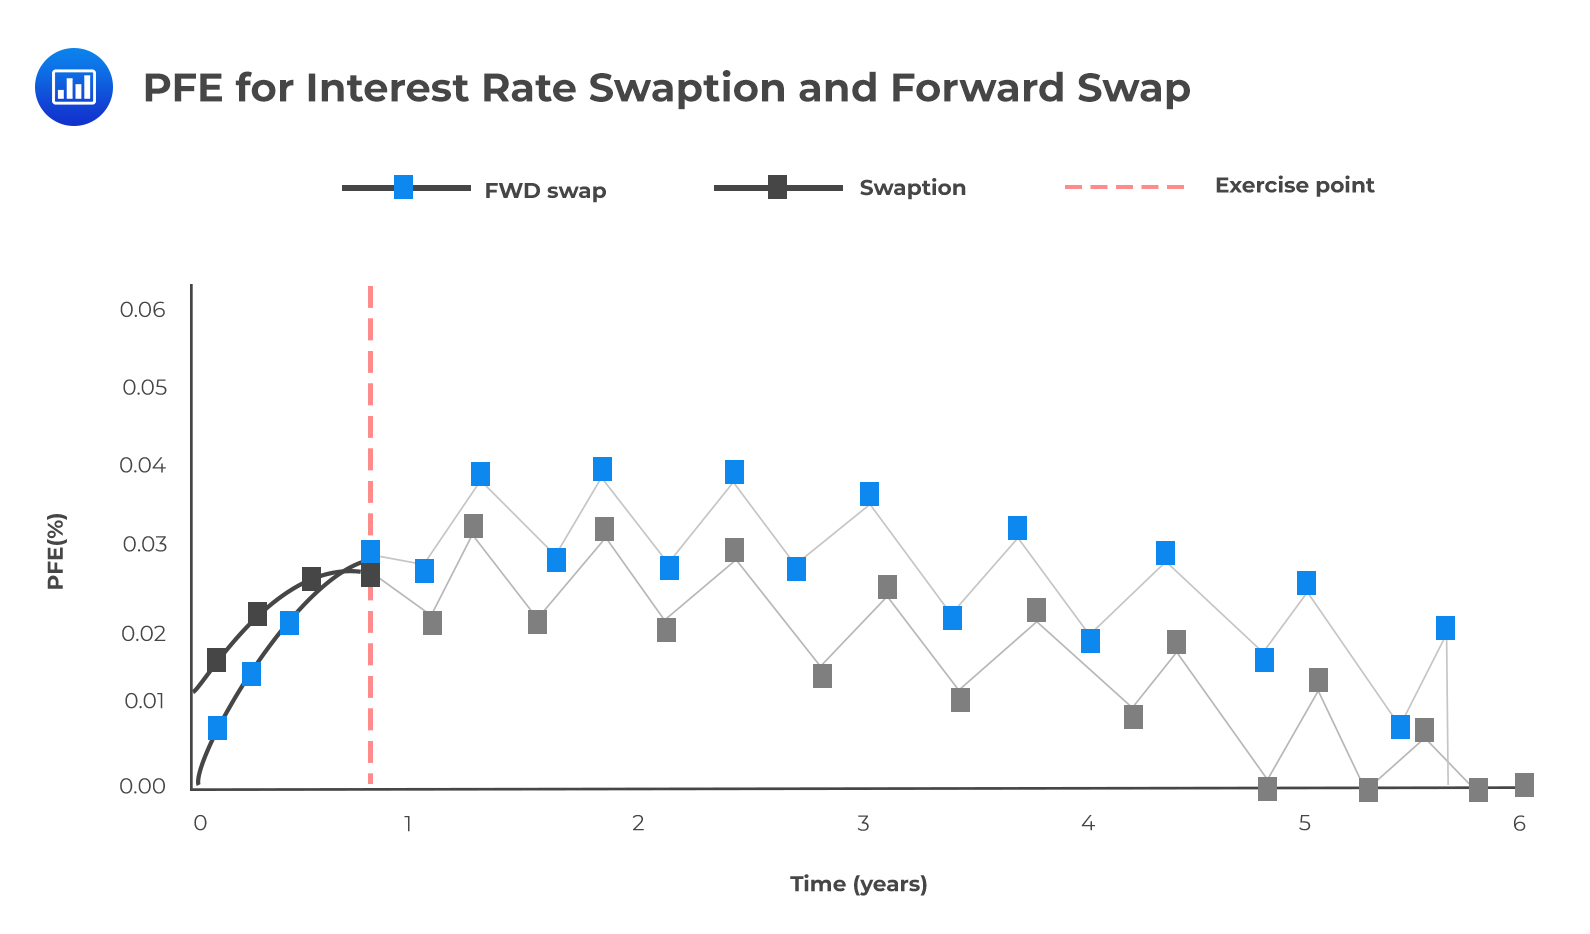 PFE for Interest Rate Swaption and Forward Swap